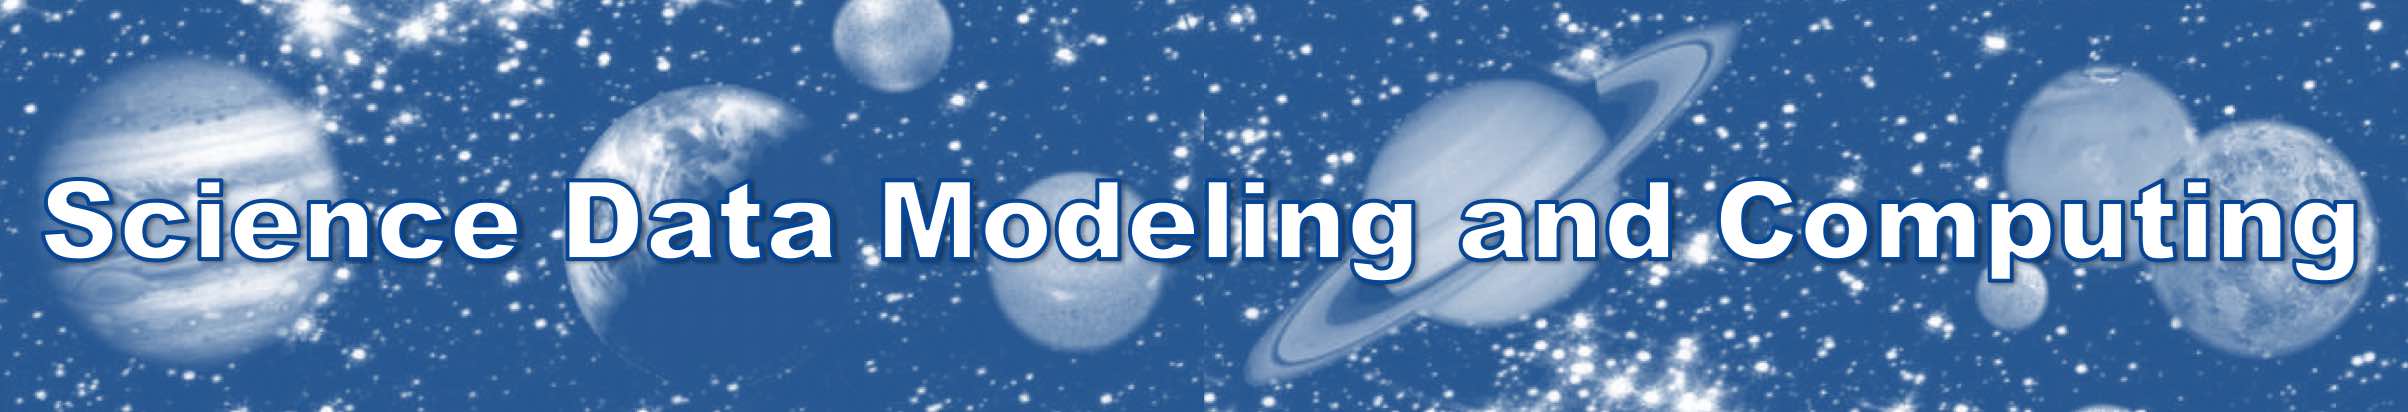 Science Data Modeling and Computing